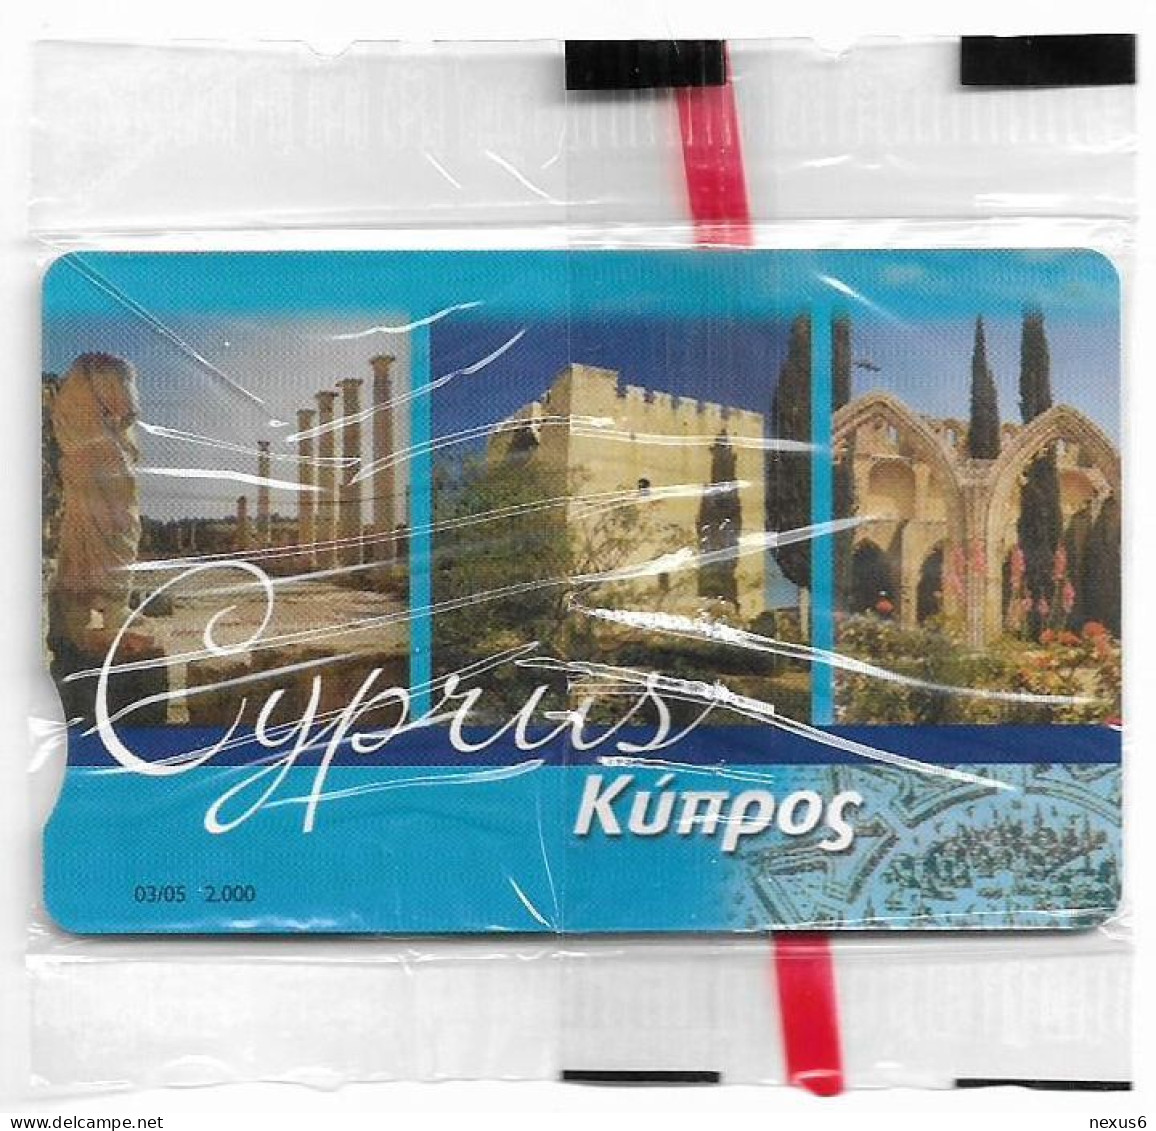 Cyprus - Cyta (Chip) - 10 Years Cyprus Telecard Collector's Society - 0105PT - 03.2005, 2.000ex, NSB - Chypre